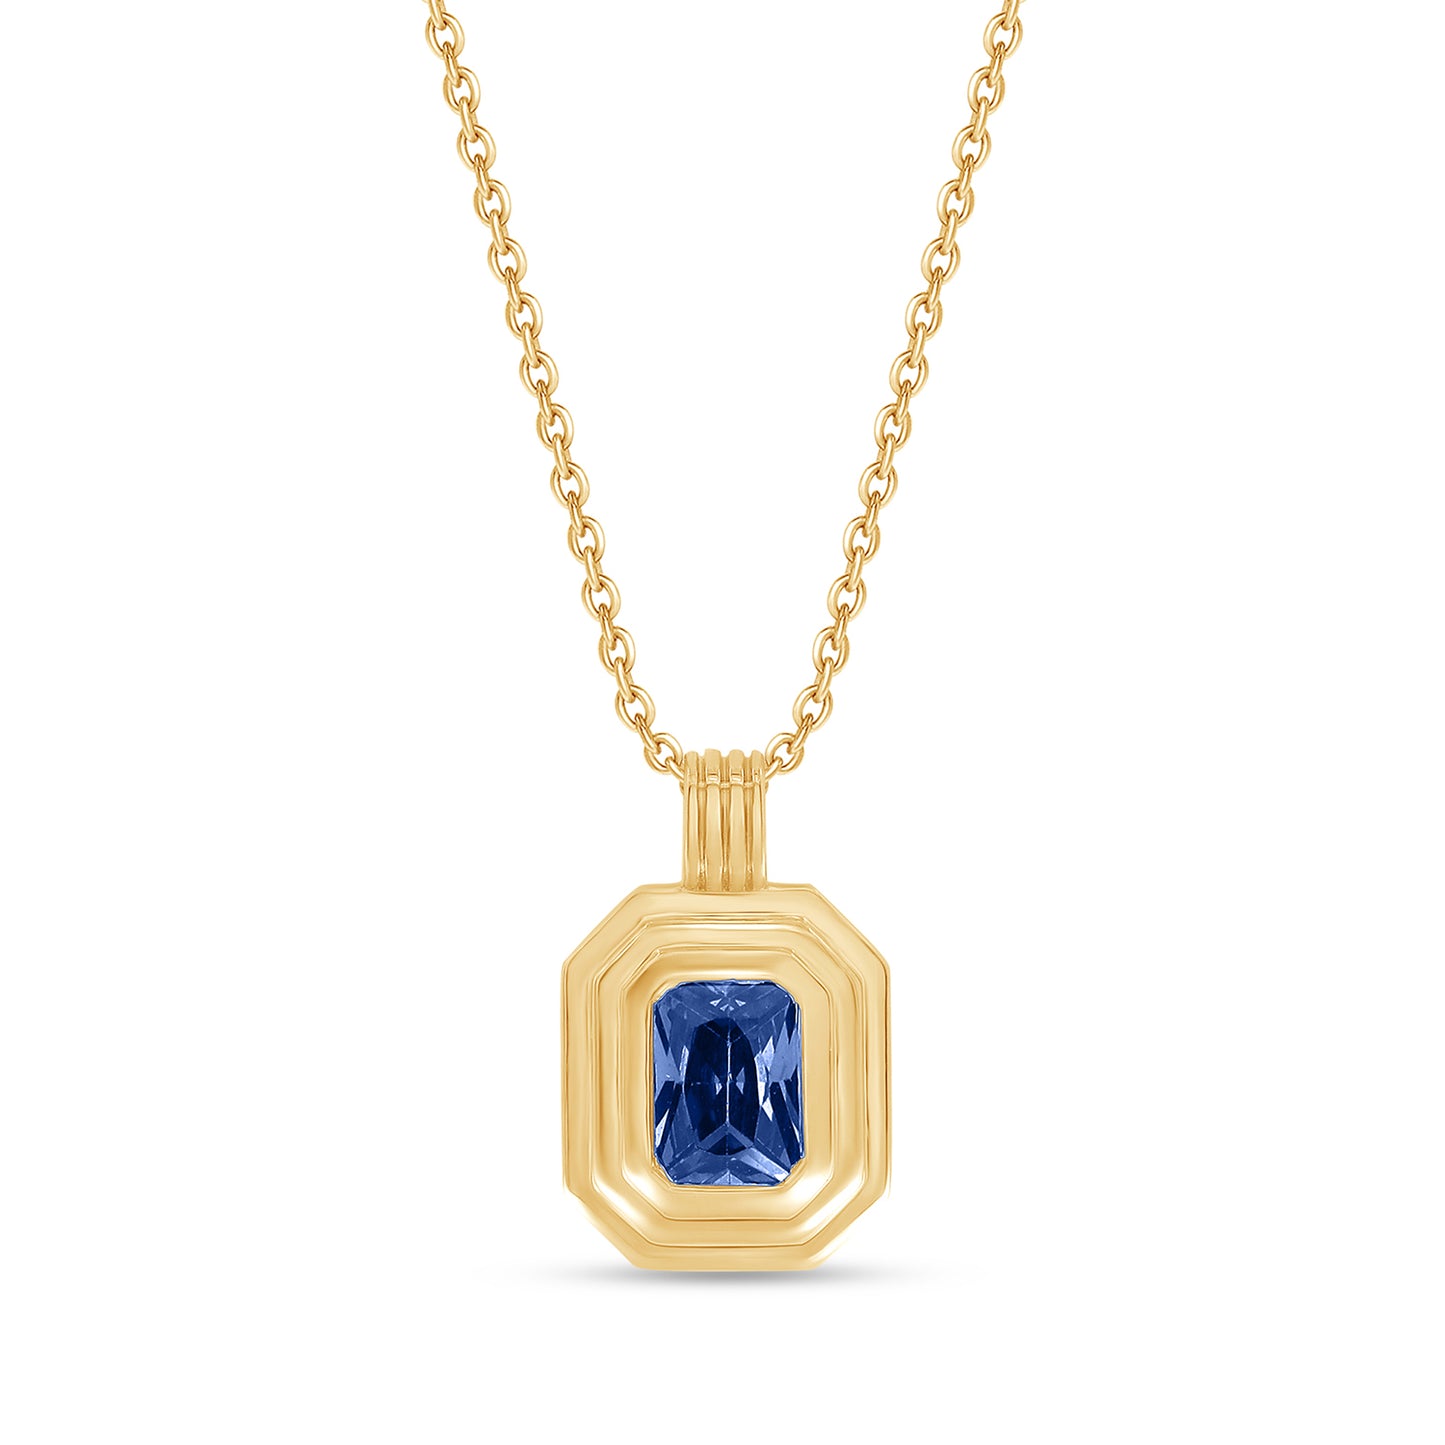 7X5MM Bezel Set Simulated Blue Sapphire Solitaire Pendant Necklace For Women In 10K & 14K Solid Gold And 925 Sterling Silver